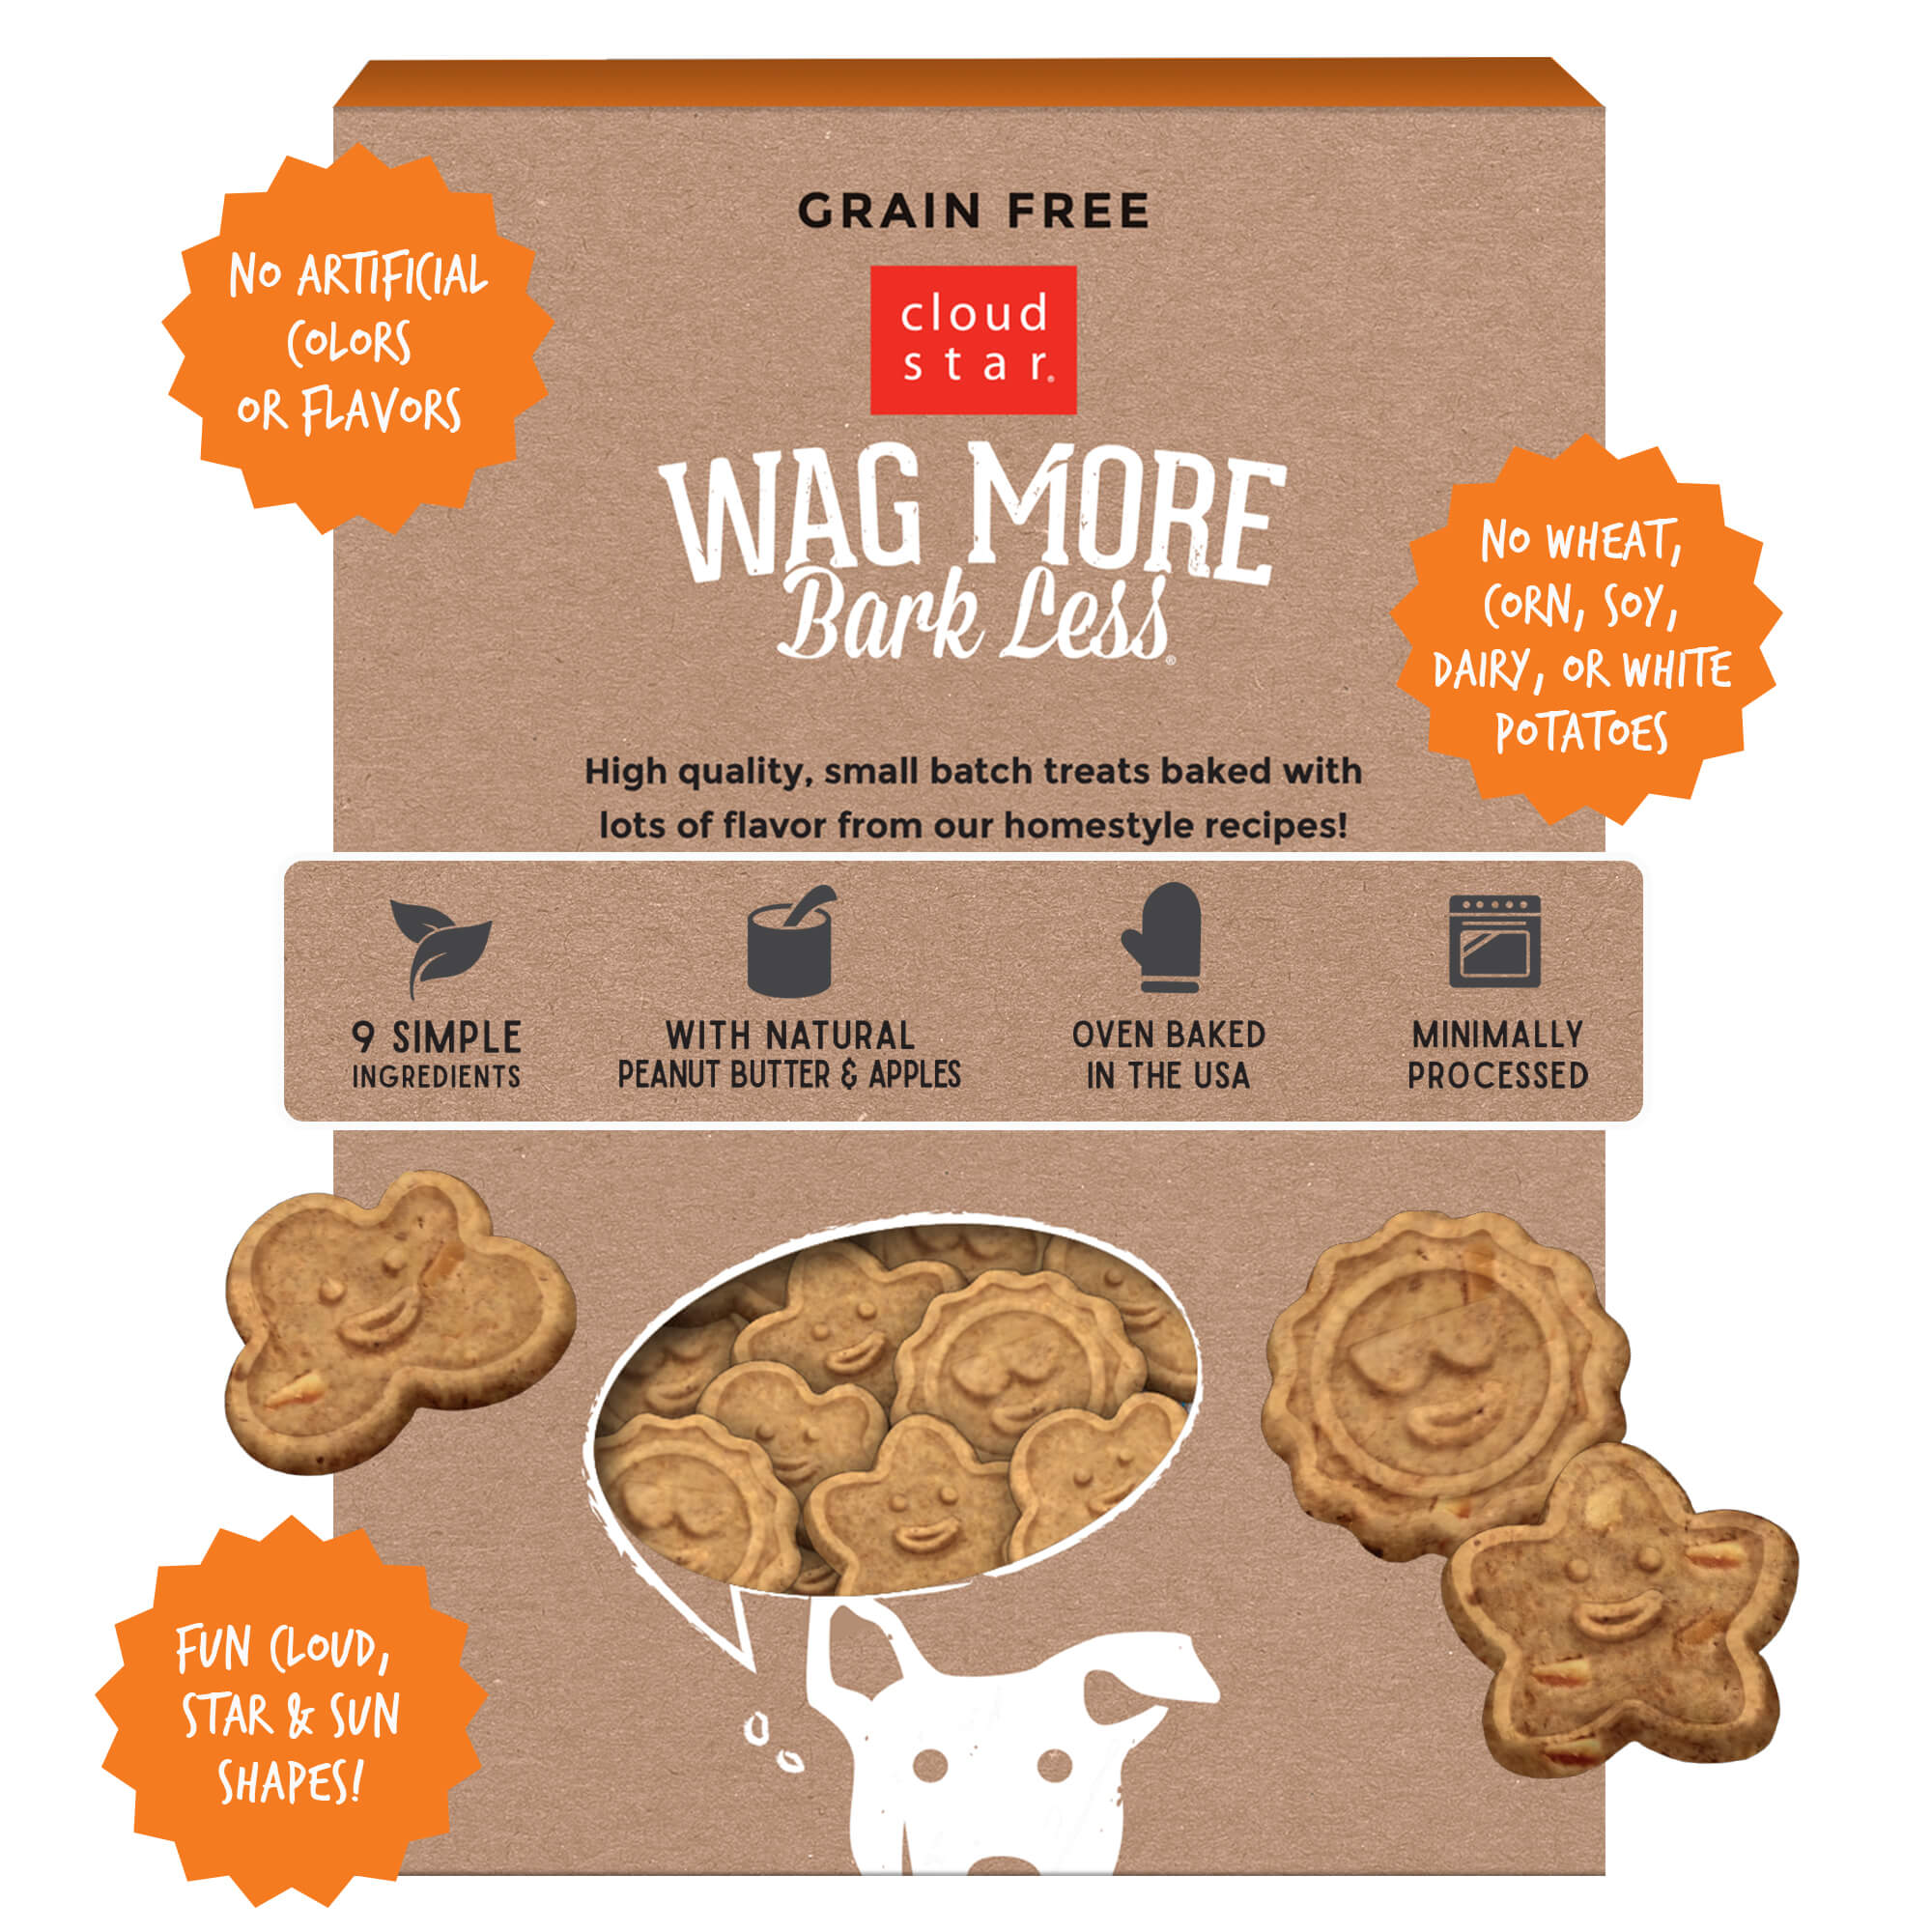 Cloud Star Wag More Bark Less Grain Free Oven Baked Dog Treats with Peanut Butter & Apples, 14oz